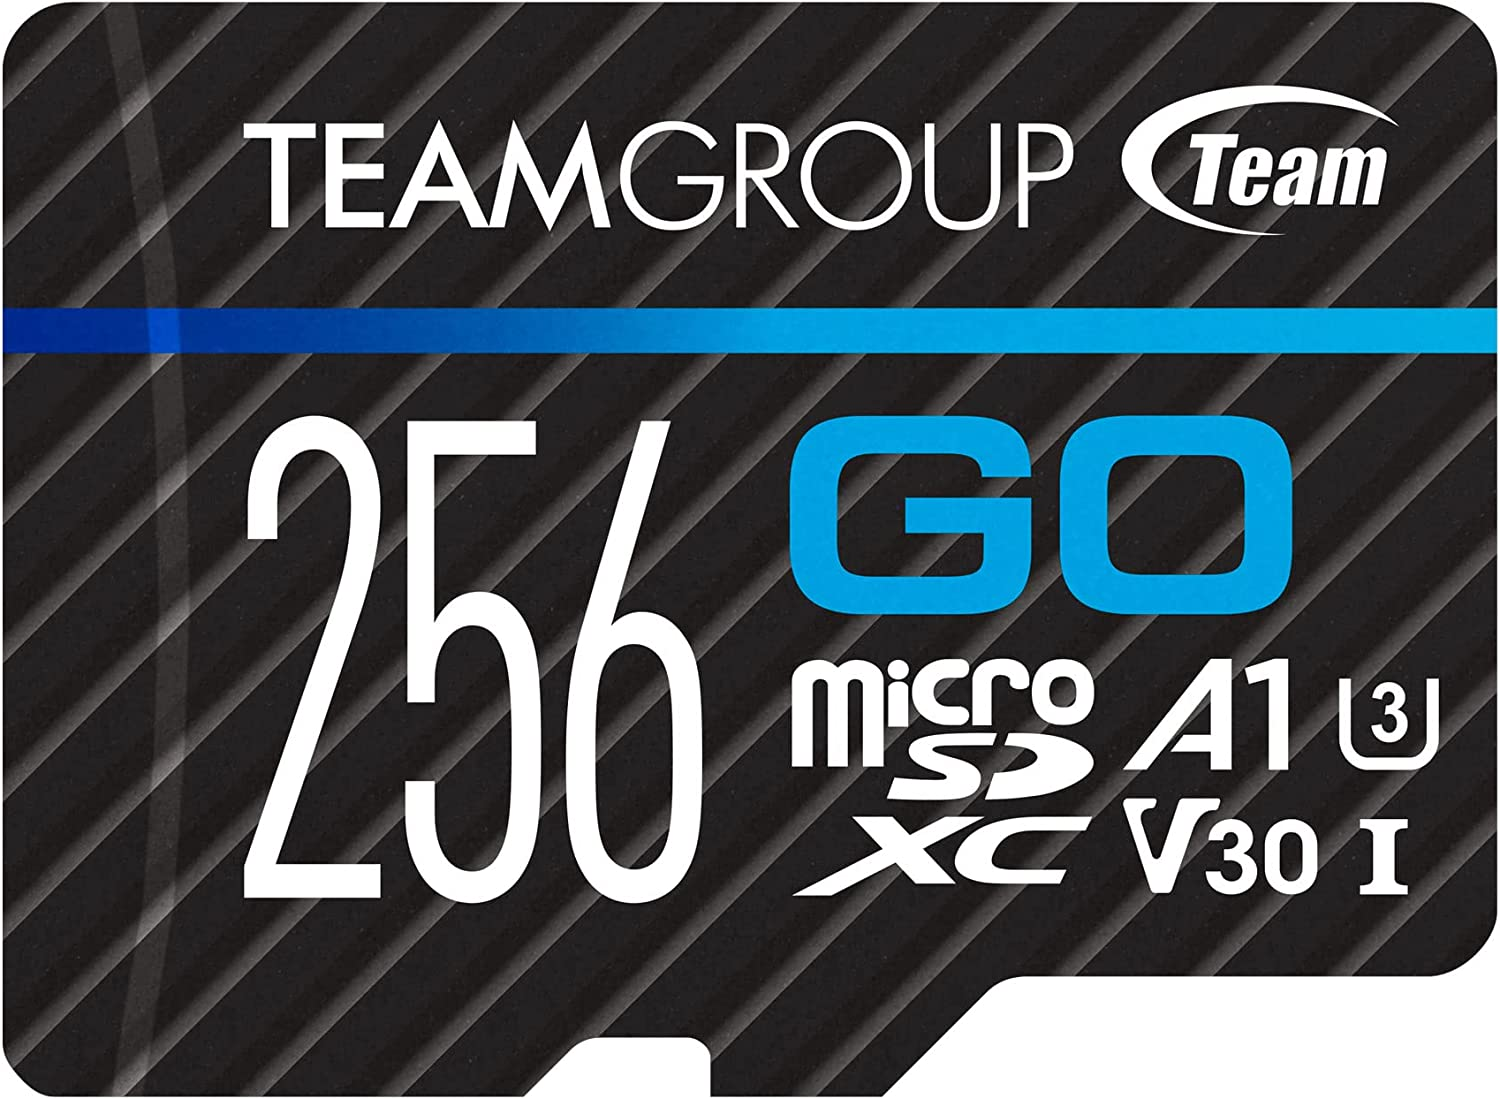 TEAMGROUP GO Card 256GB Micro SDXC UHS-I U3 V30 4K for GoPro & Drone & Action Cameras High Speed Flash Memory Card with Adapter $14.99